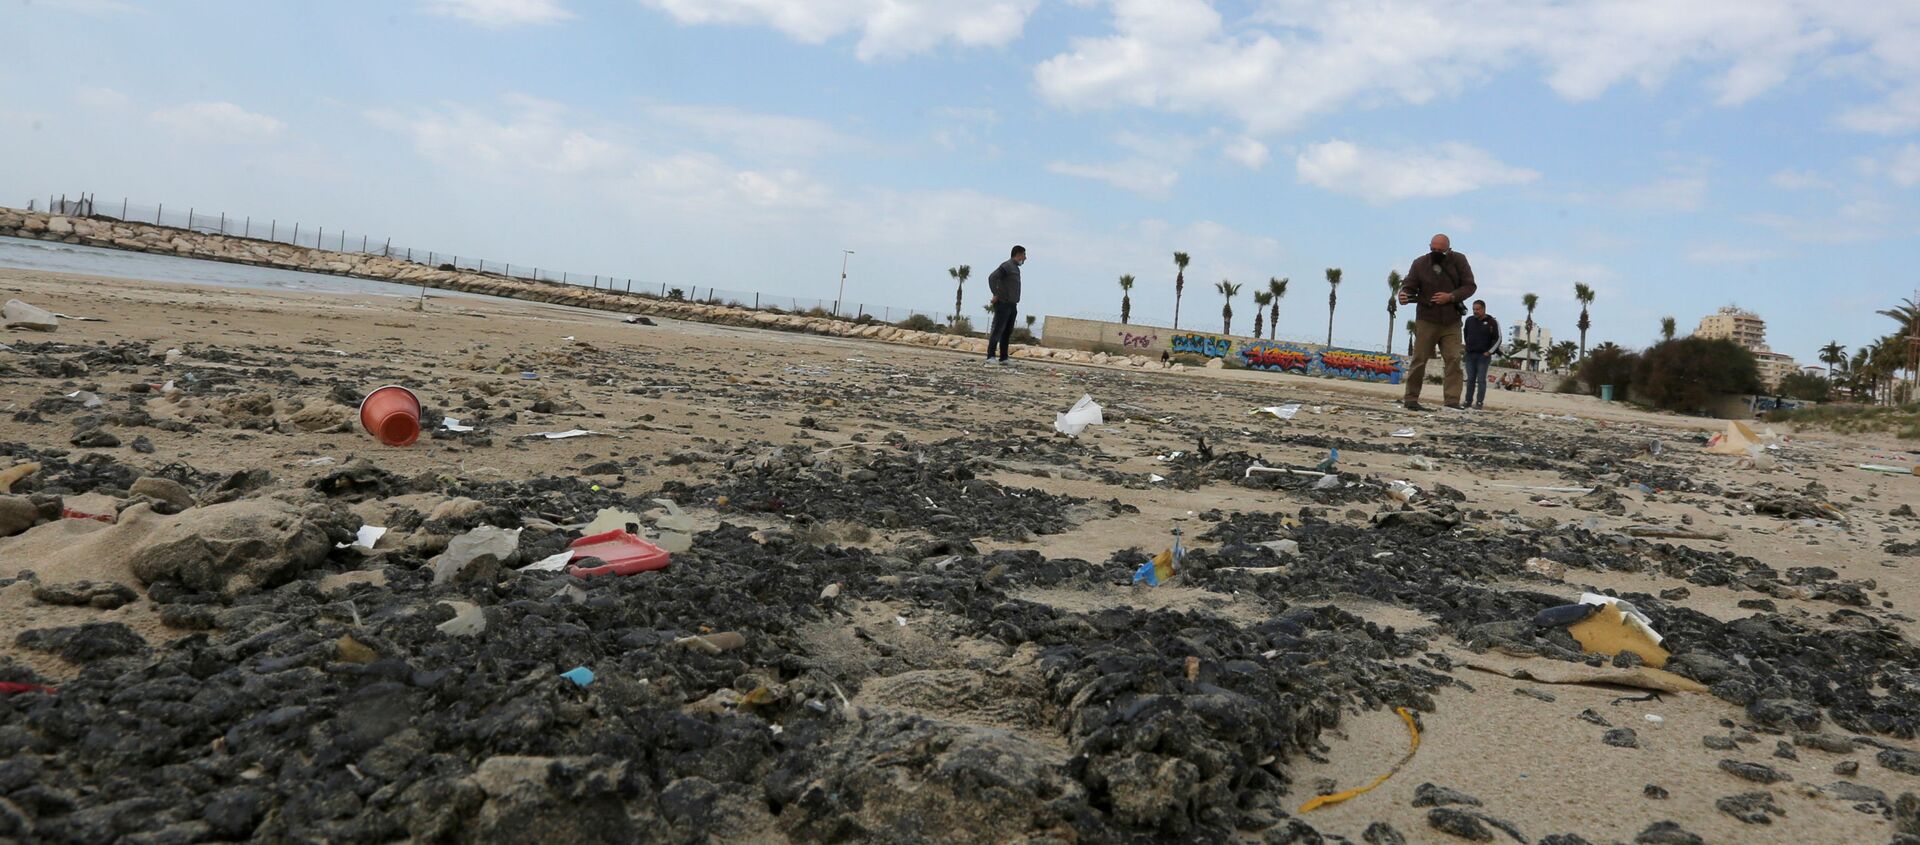 Tar is seen on the beach in the aftermath of an oil spill that drenched much of the Mediterranean, in Tyre nature reserve, Lebanon February 22, 2021 - Sputnik International, 1920, 24.02.2021